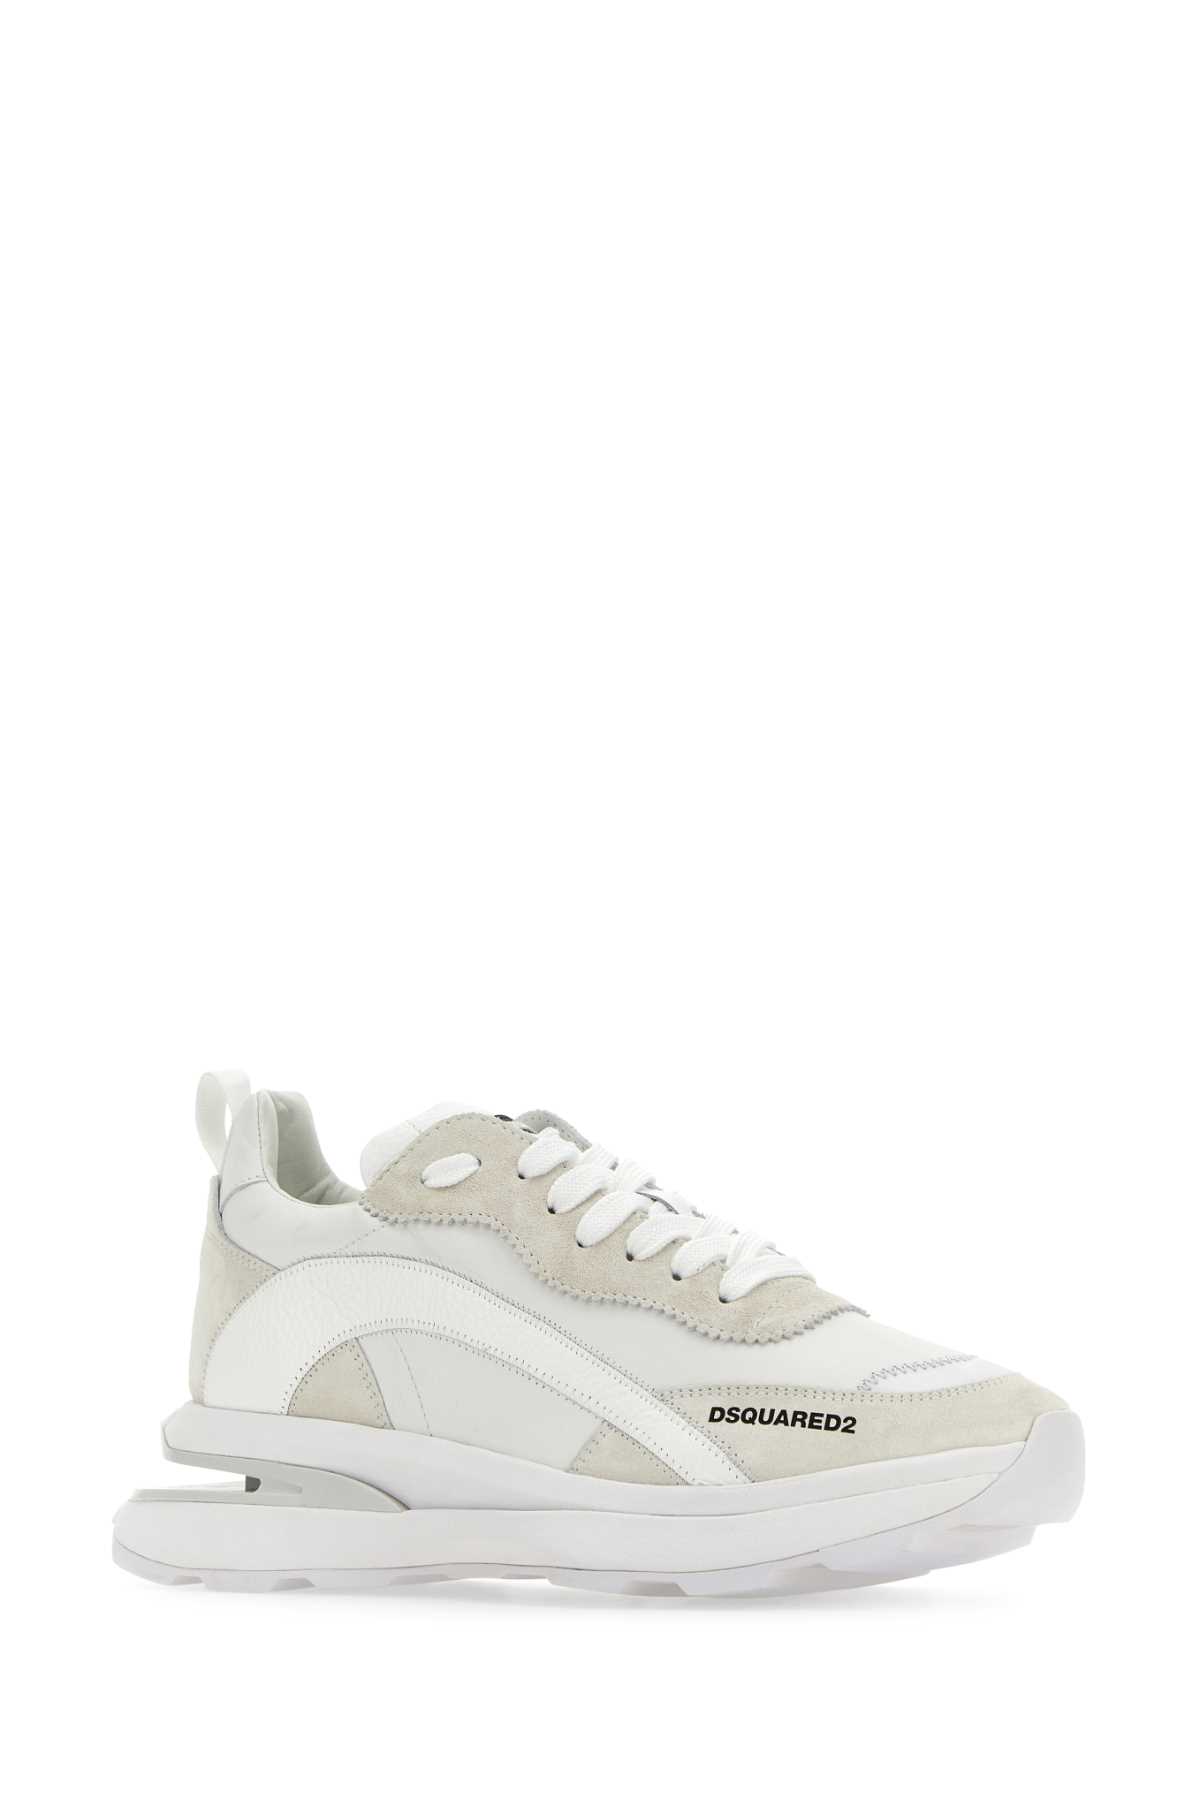 Dsquared2 Two-tone Leather And Suede Slash Sneakers In 1062